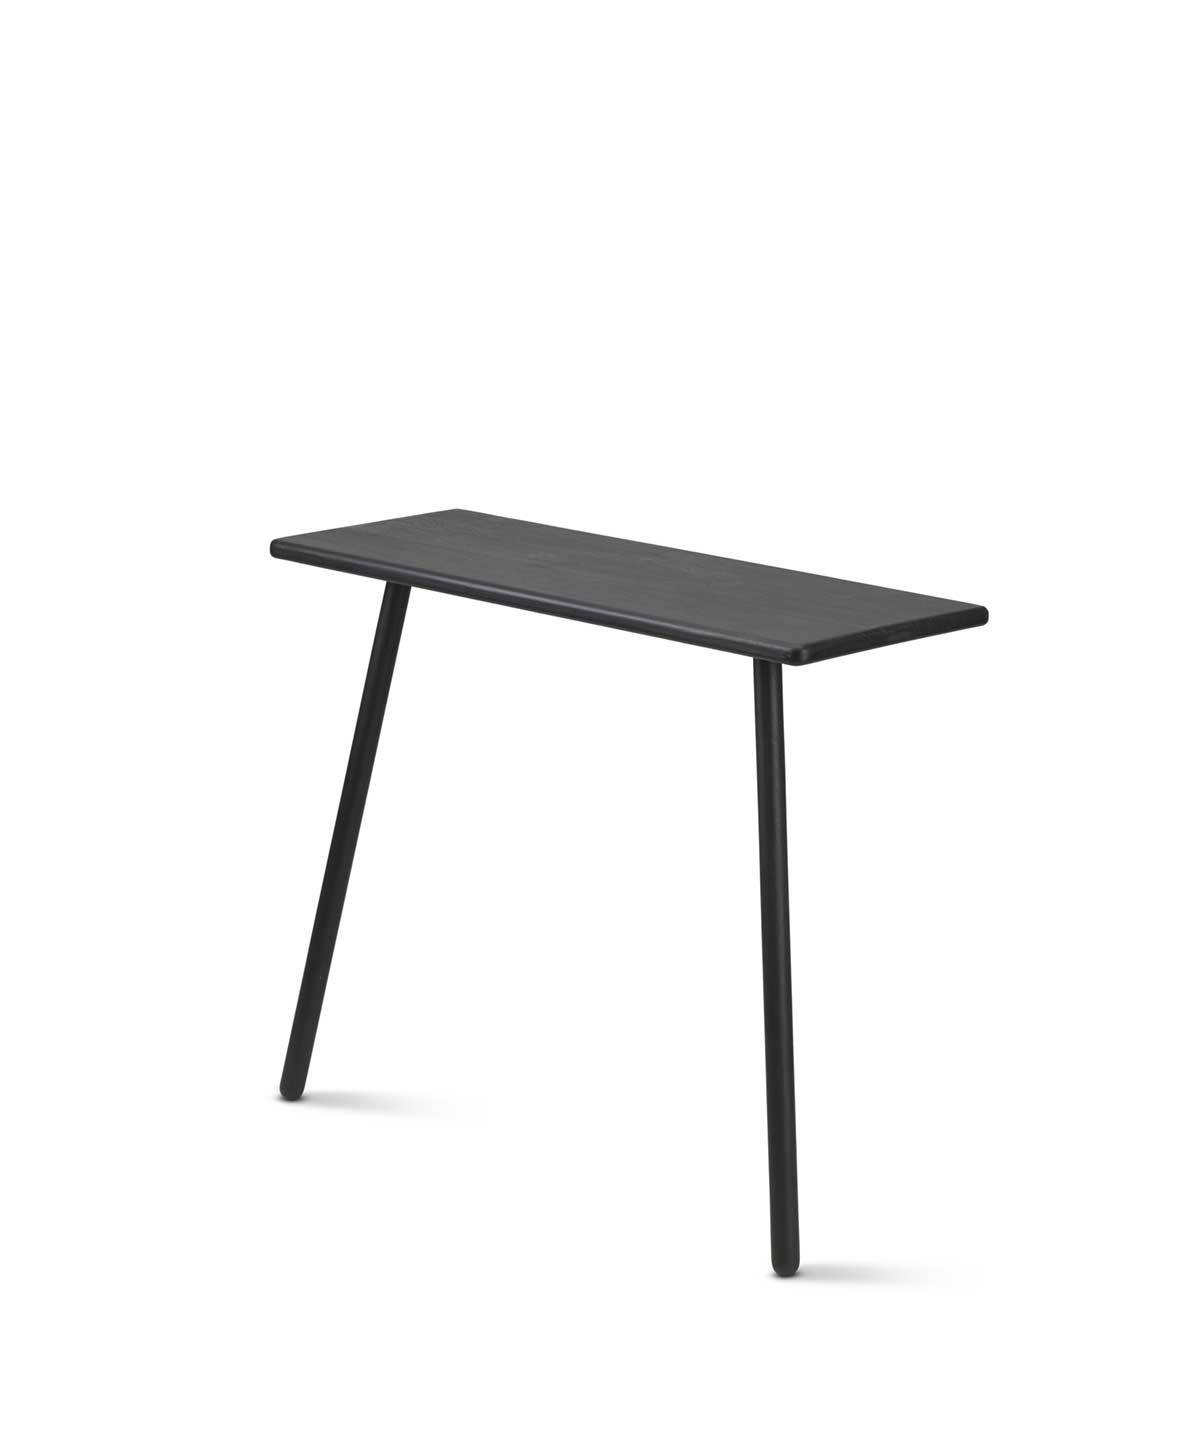 Georg Console Table by Skagerak | TRNK